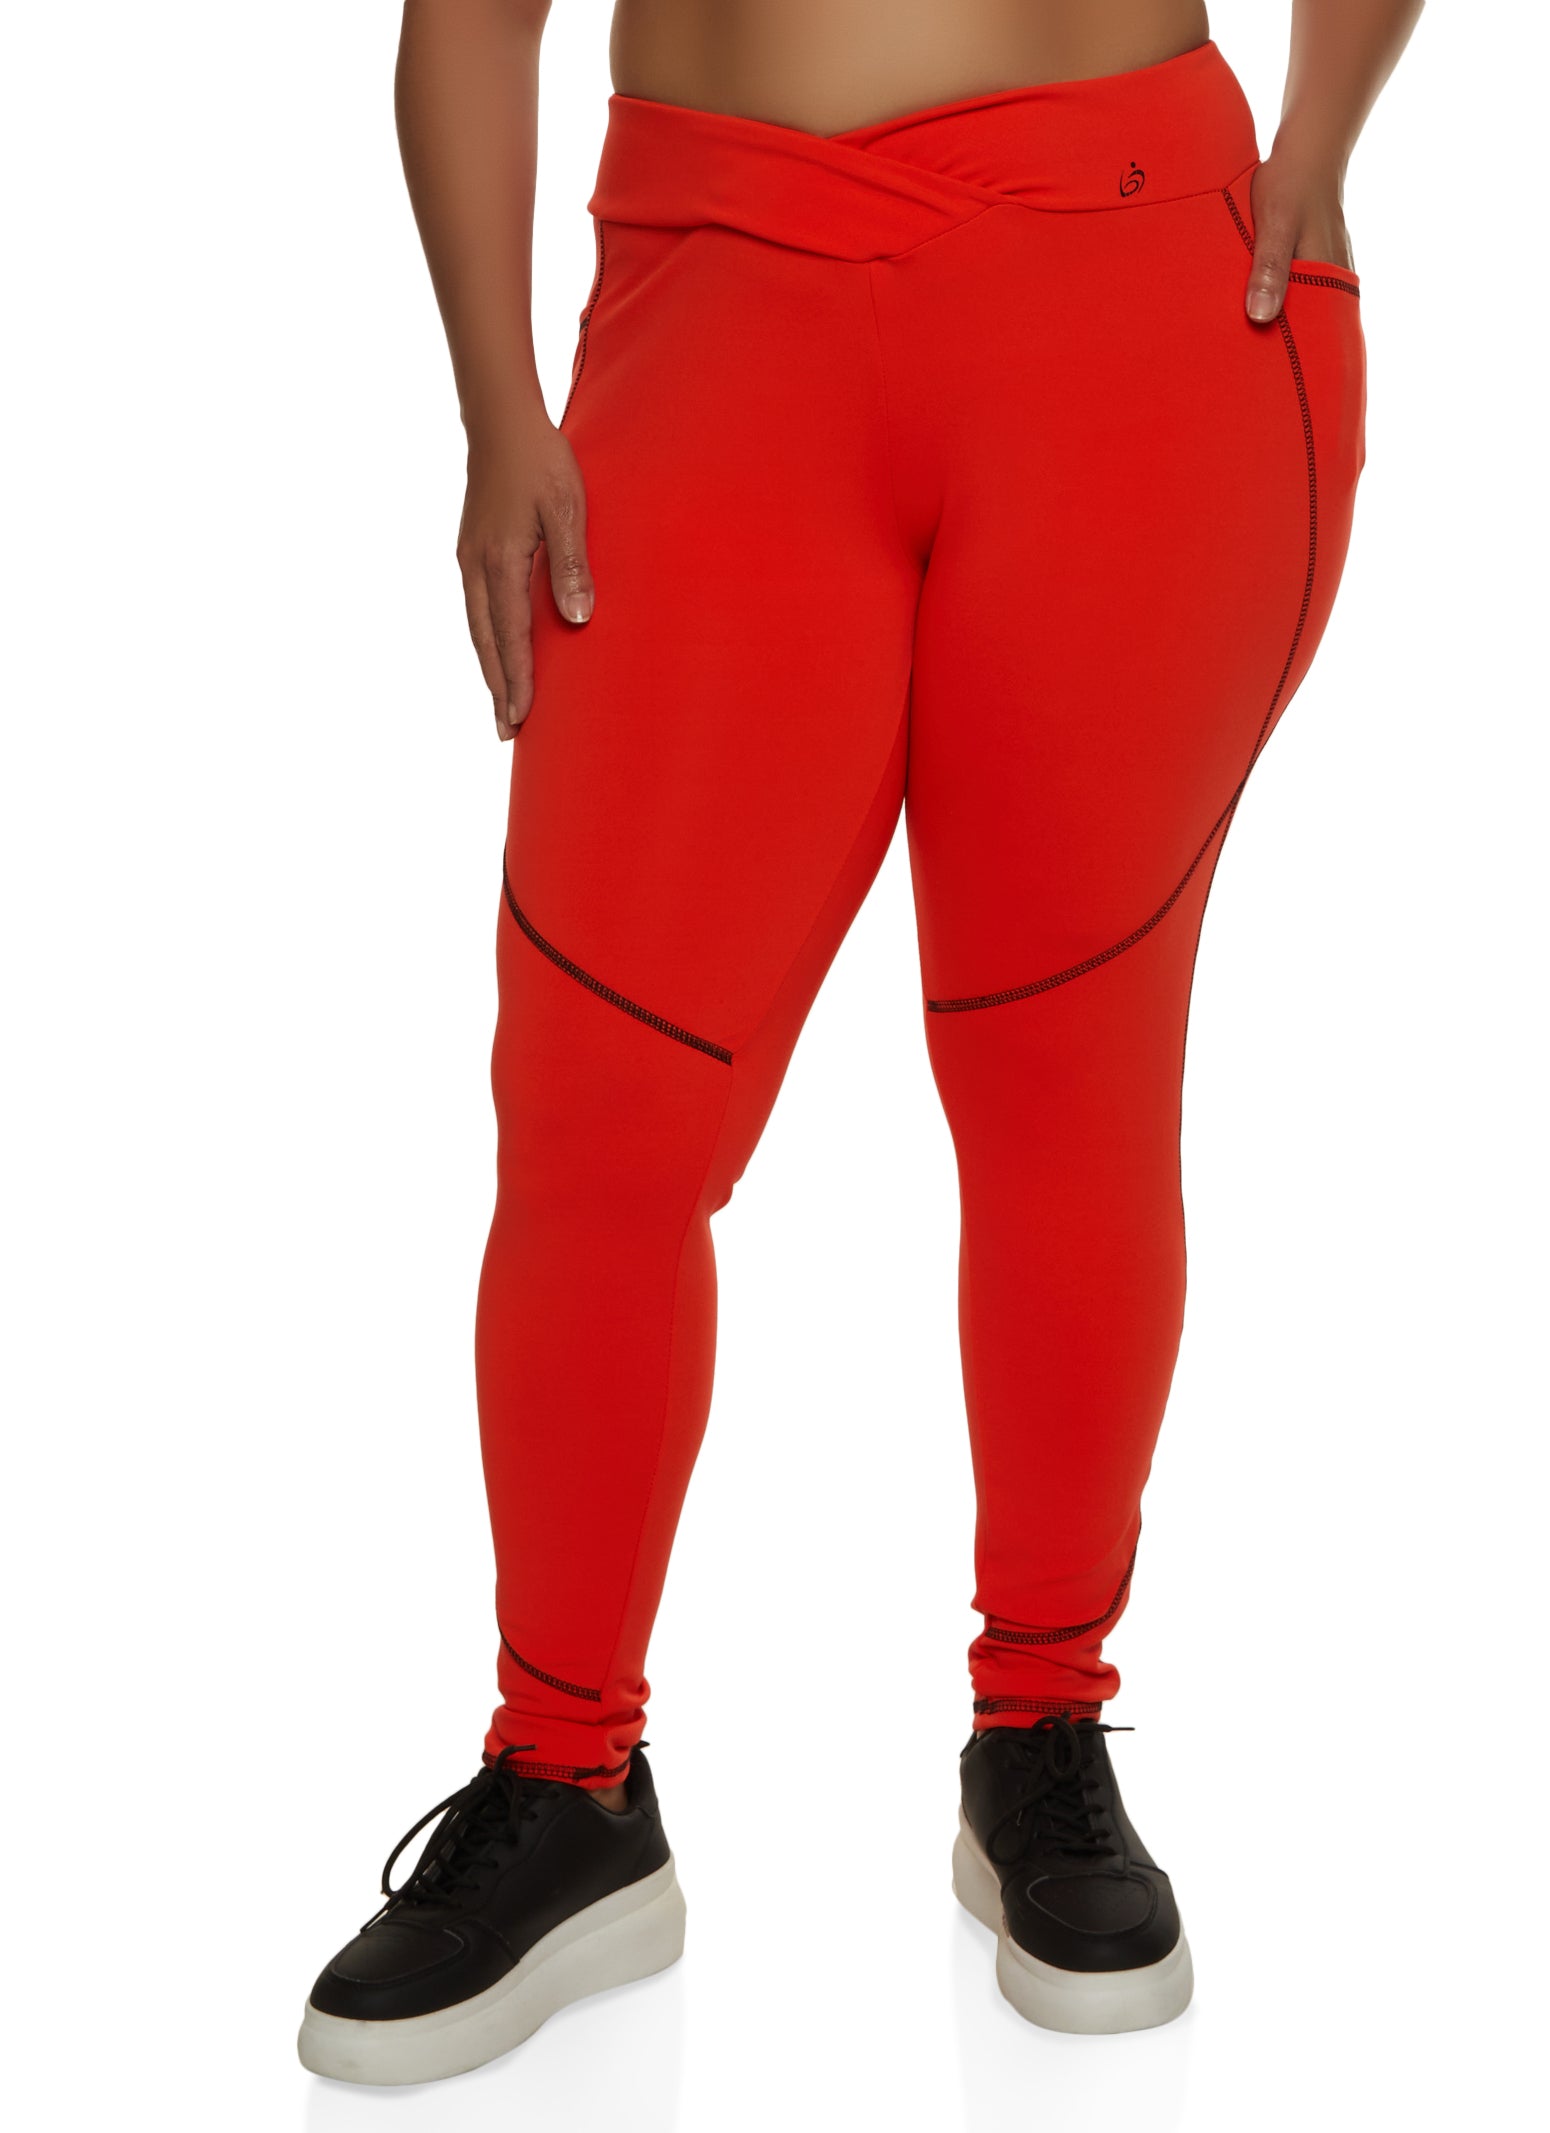 SMIDOW Special Deals Leggings for Women Plus Size Pack Womens 2 in